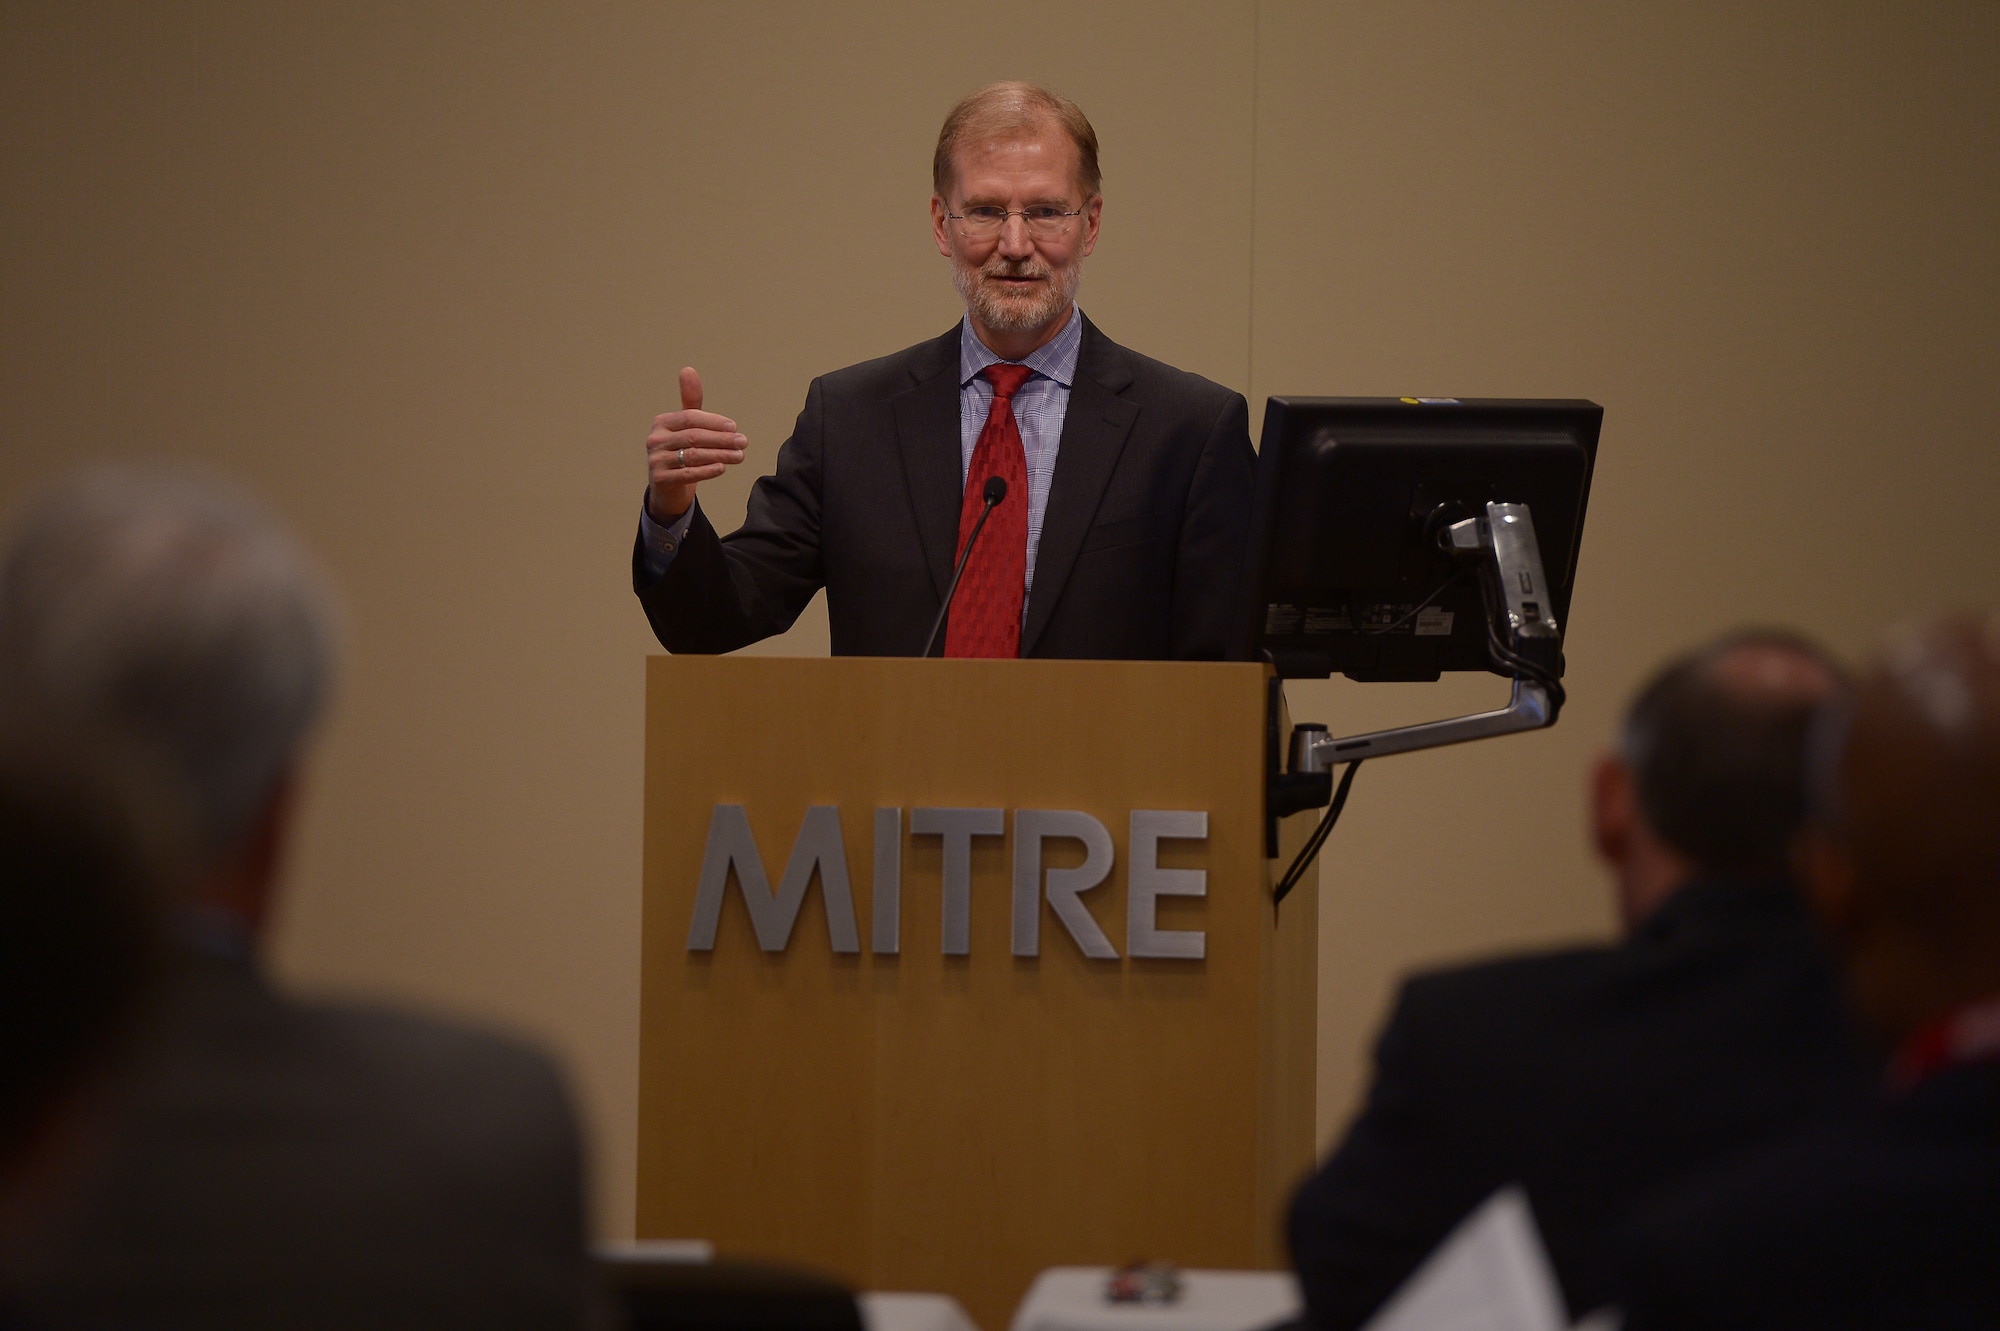 Steven Wert, Battle Management program executive officer, at Hanscom Air Force Base, discusses how current cyber developments can affect Air Force operations during a conference at the MITRE Corporation complex in Bedford, Mass., Nov. 13, 2014. The “Cyber Challenges and Solutions: Today and Tomorrow” conference brought together officials from the military, other government agencies and the private sector with the goal of discussing current cyber trends.  (U.S. Air Force photo by Jerry Saslav)